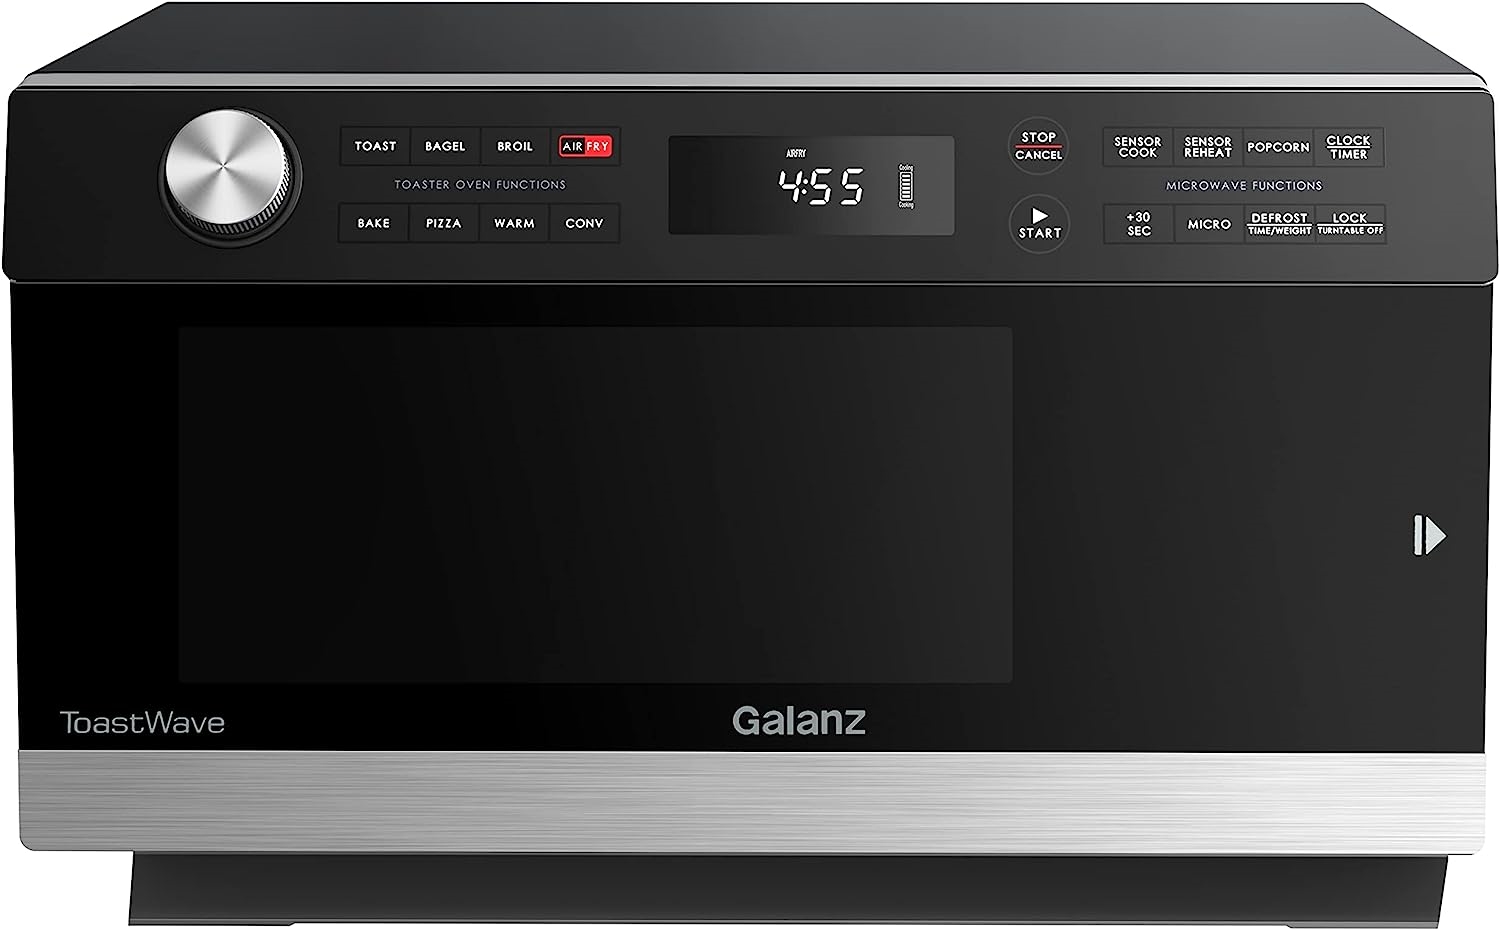 Galanz Microwave Toaster Oven | DeviceDaily.com